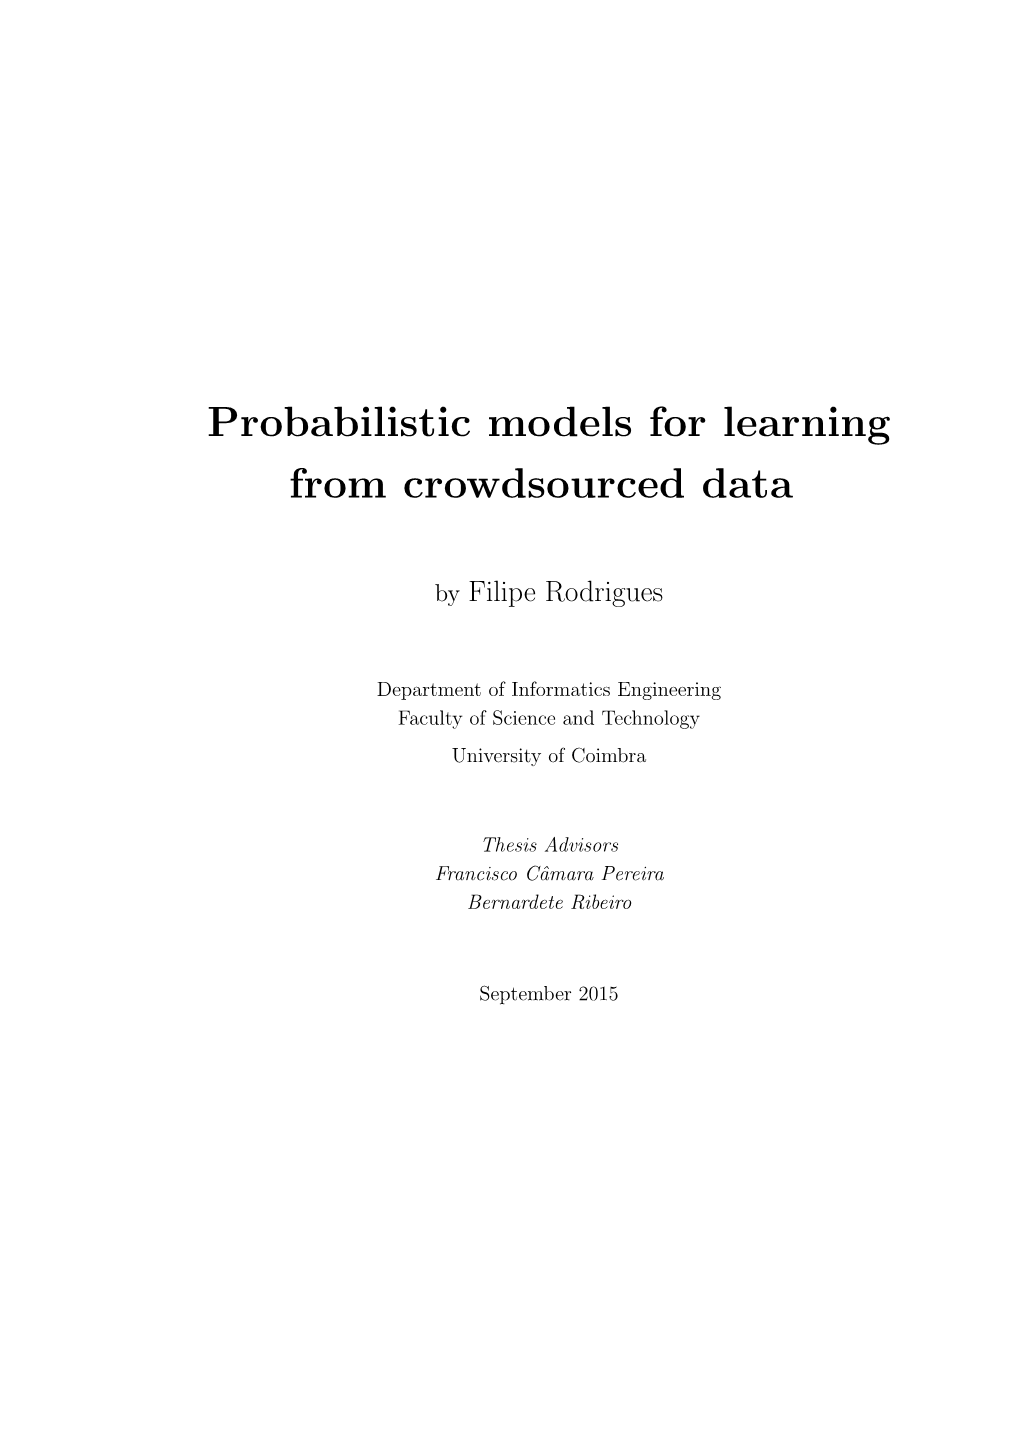 Probabilistic Models for Learning from Crowdsourced Data